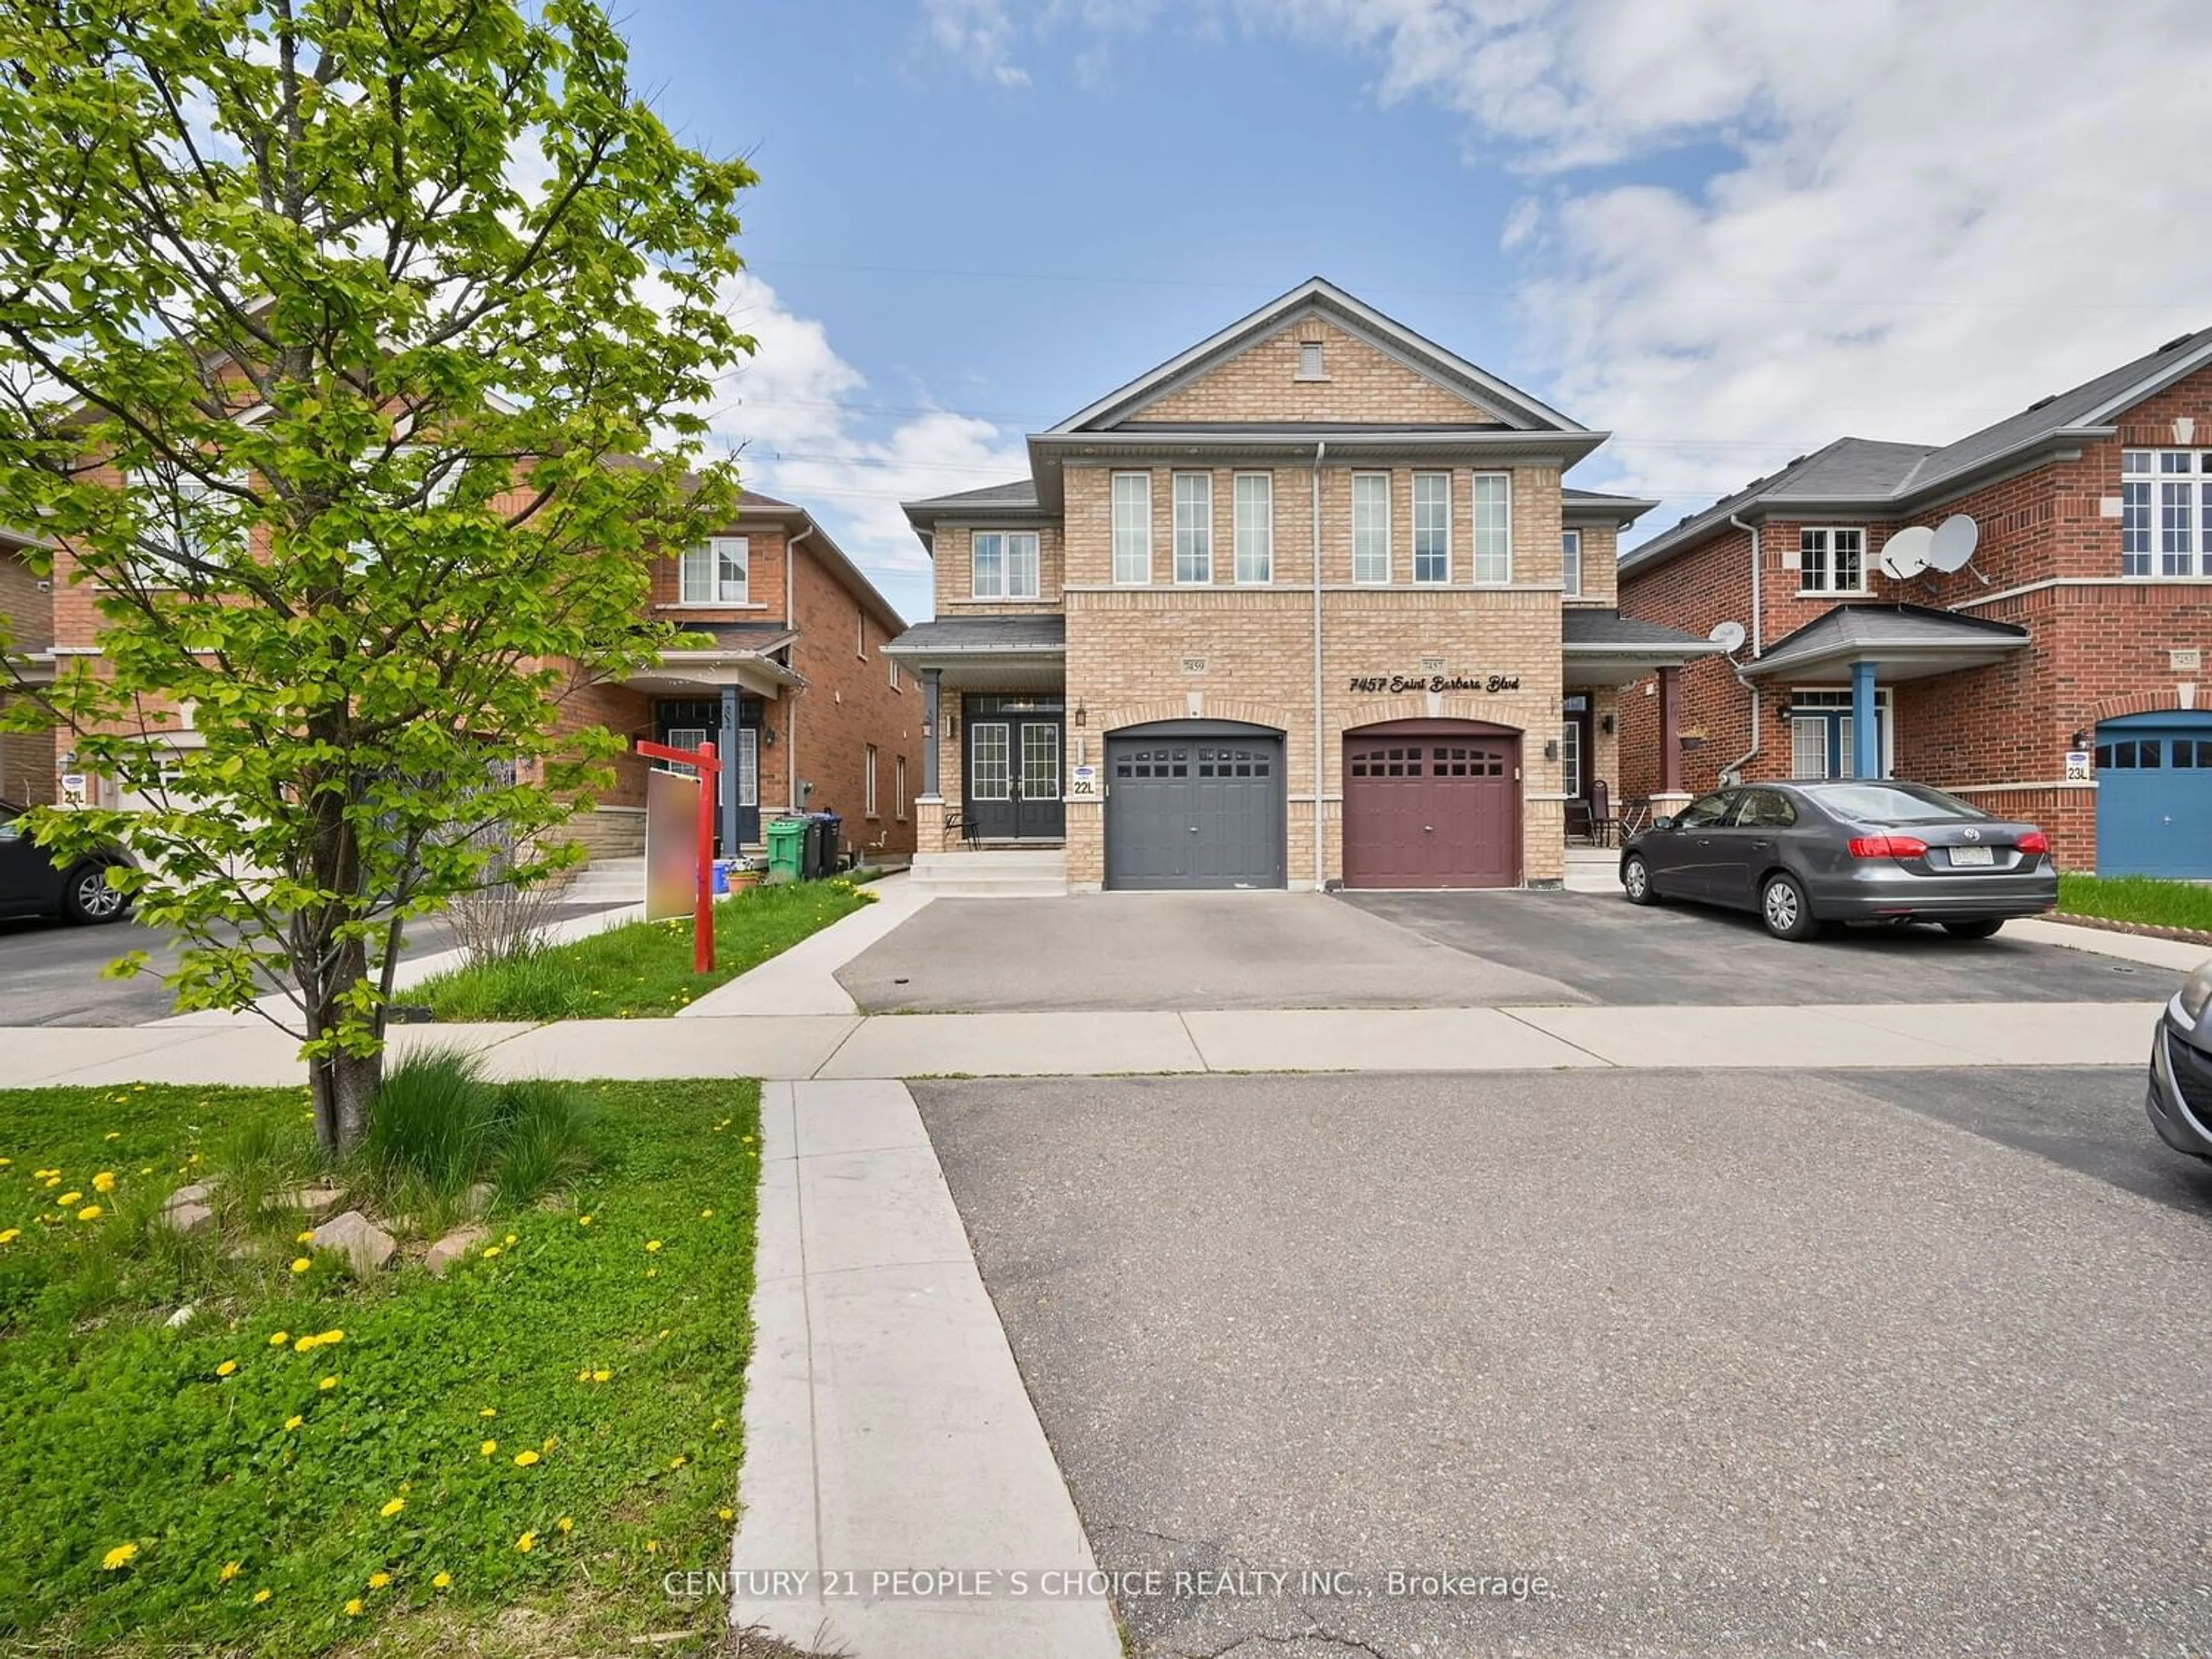 Frontside or backside of a home for 7459 St. Barbara Blvd, Mississauga Ontario L5W 0G3